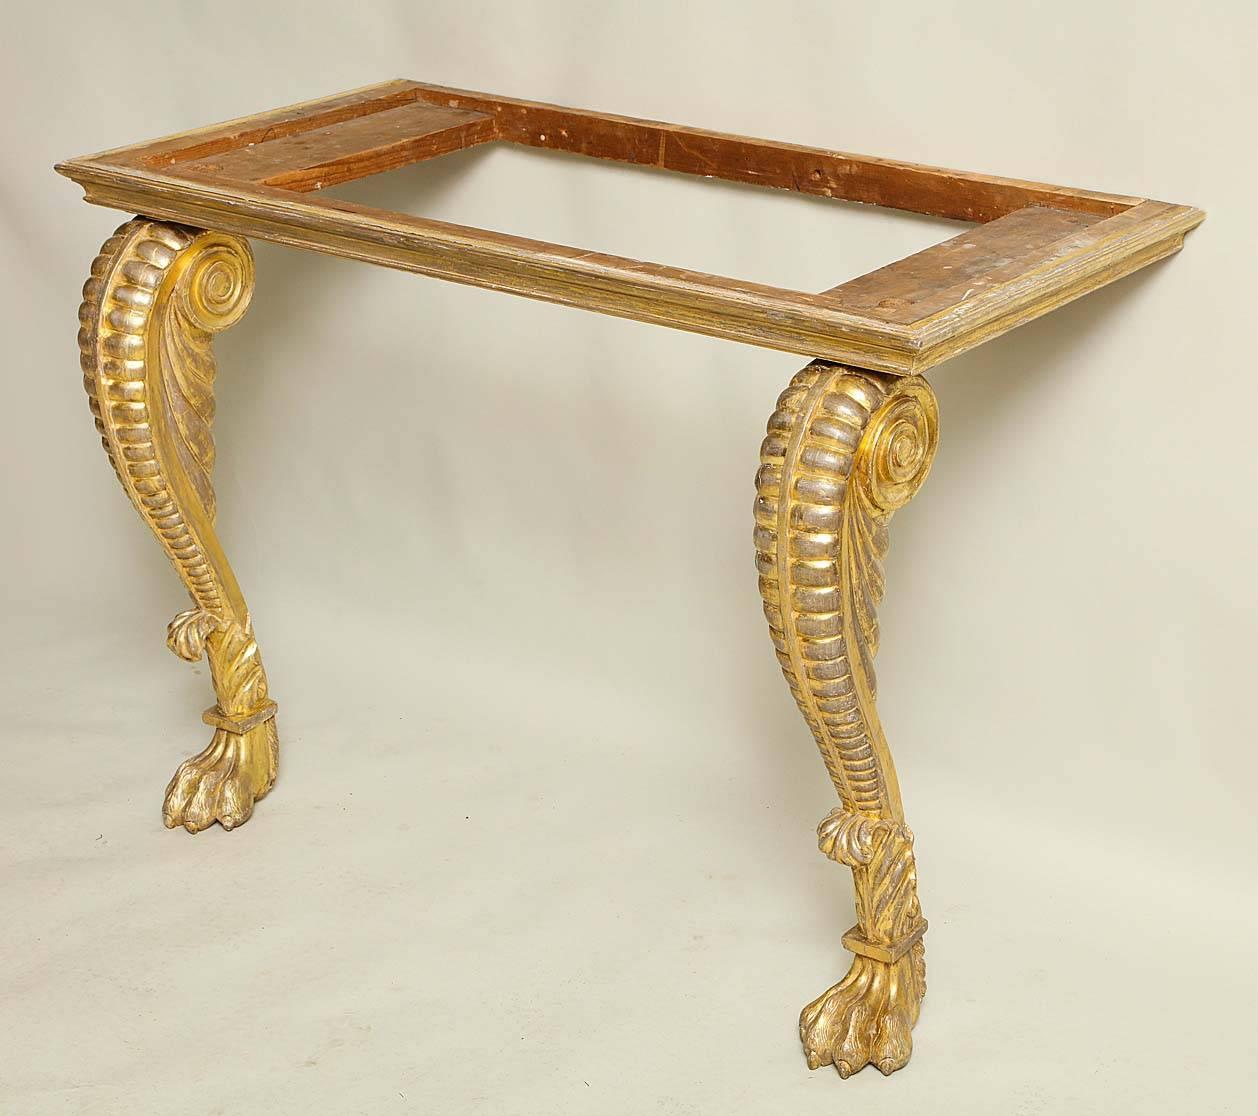 Very fine Irish Regency giltwood pier table, the Mona marble-top over simple shallow molded apron, standing on boldly carved scrolled and ribbed legs with acanthus collars and lion paw feet, retaining original and richly burnished and rubbed gilding